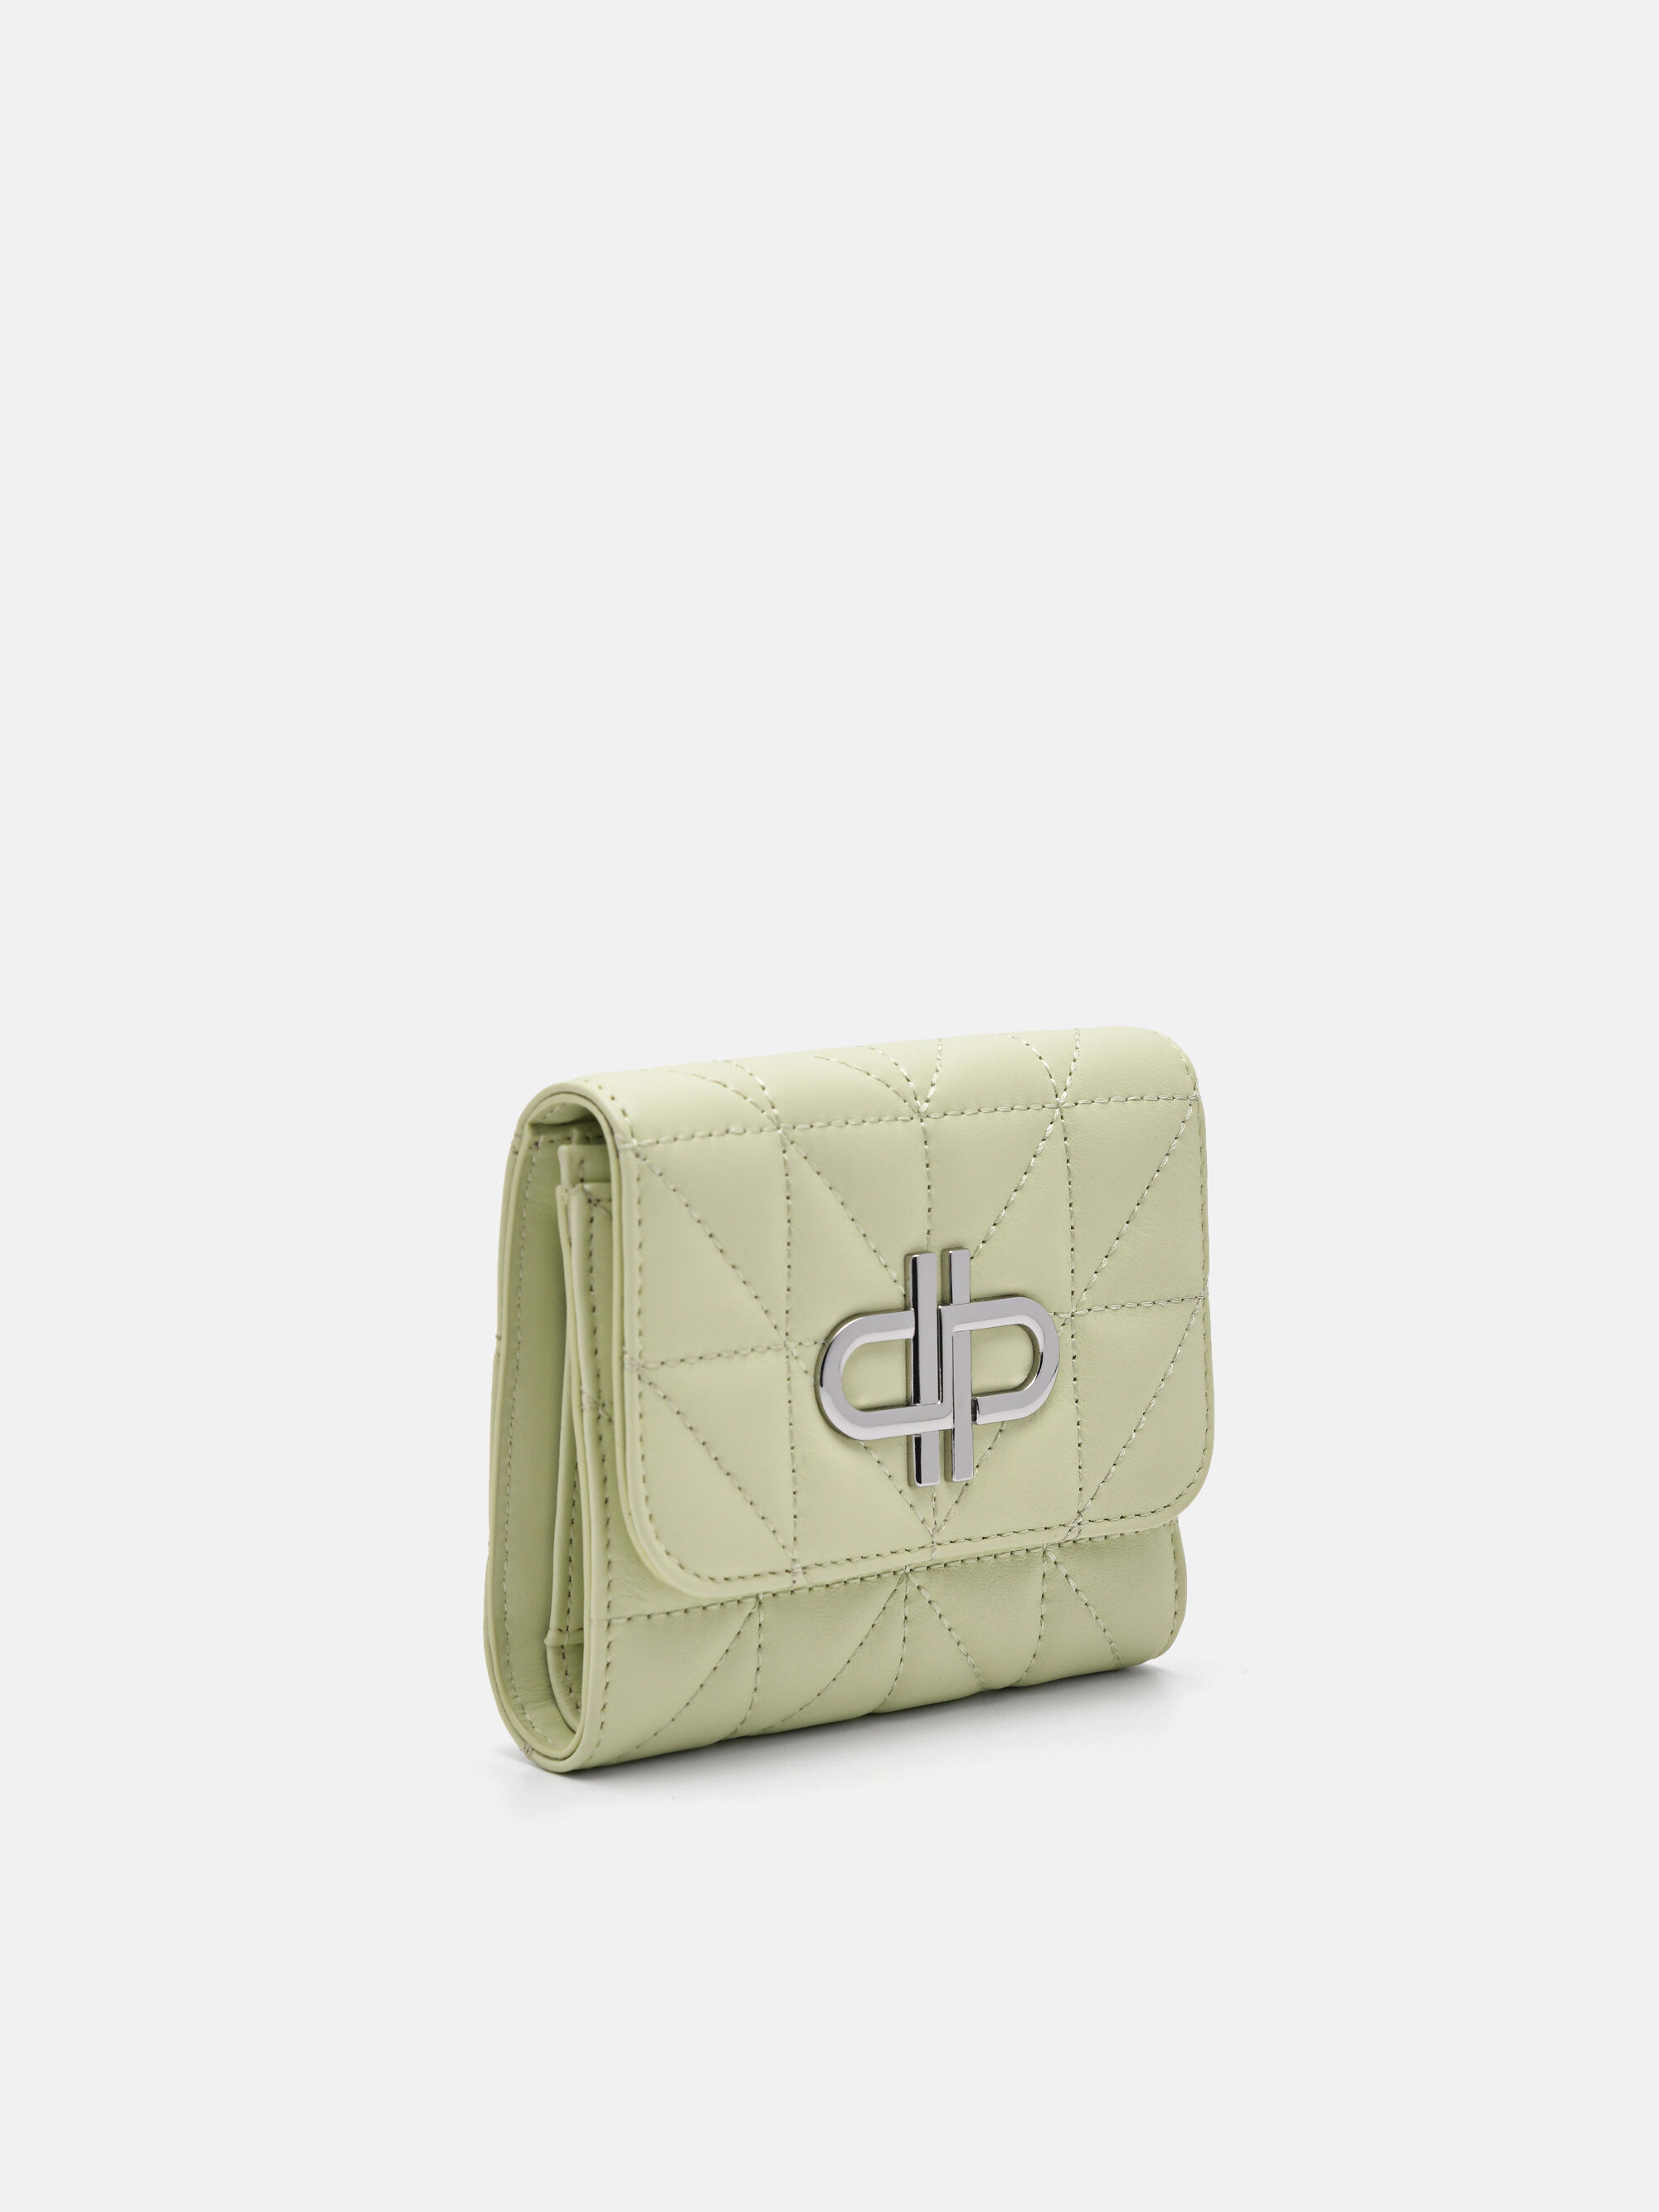 PEDRO Icon Leather Tri-Fold Wallet in Pixel, Light Green